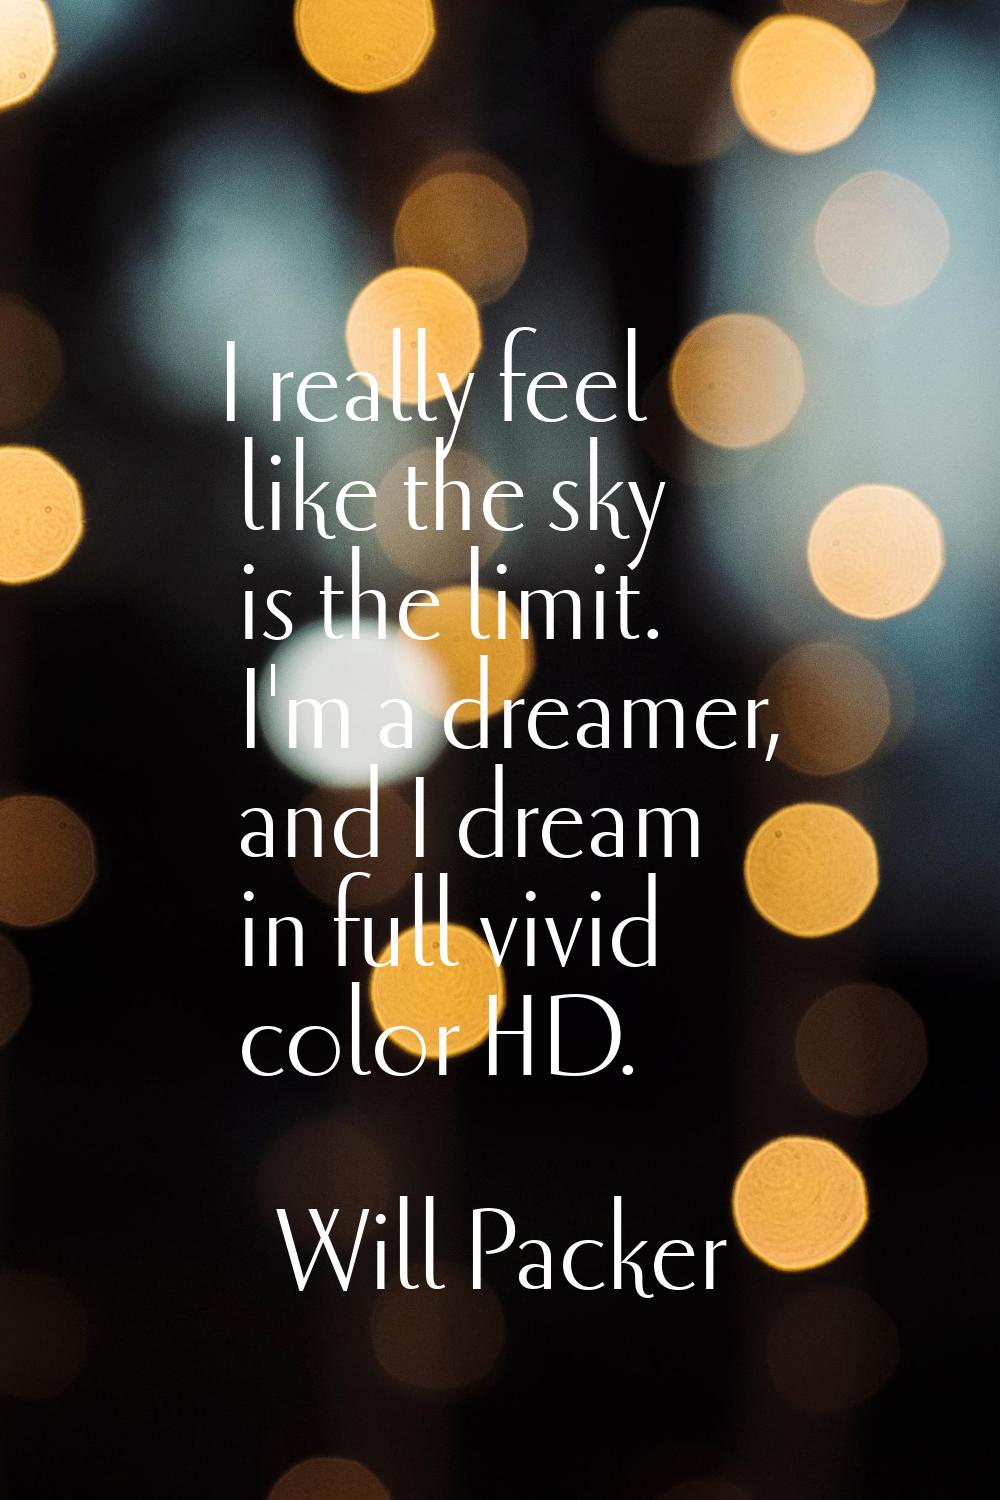 I really feel like the sky is the limit. I'm a dreamer, and I dream in full vivid color HD.